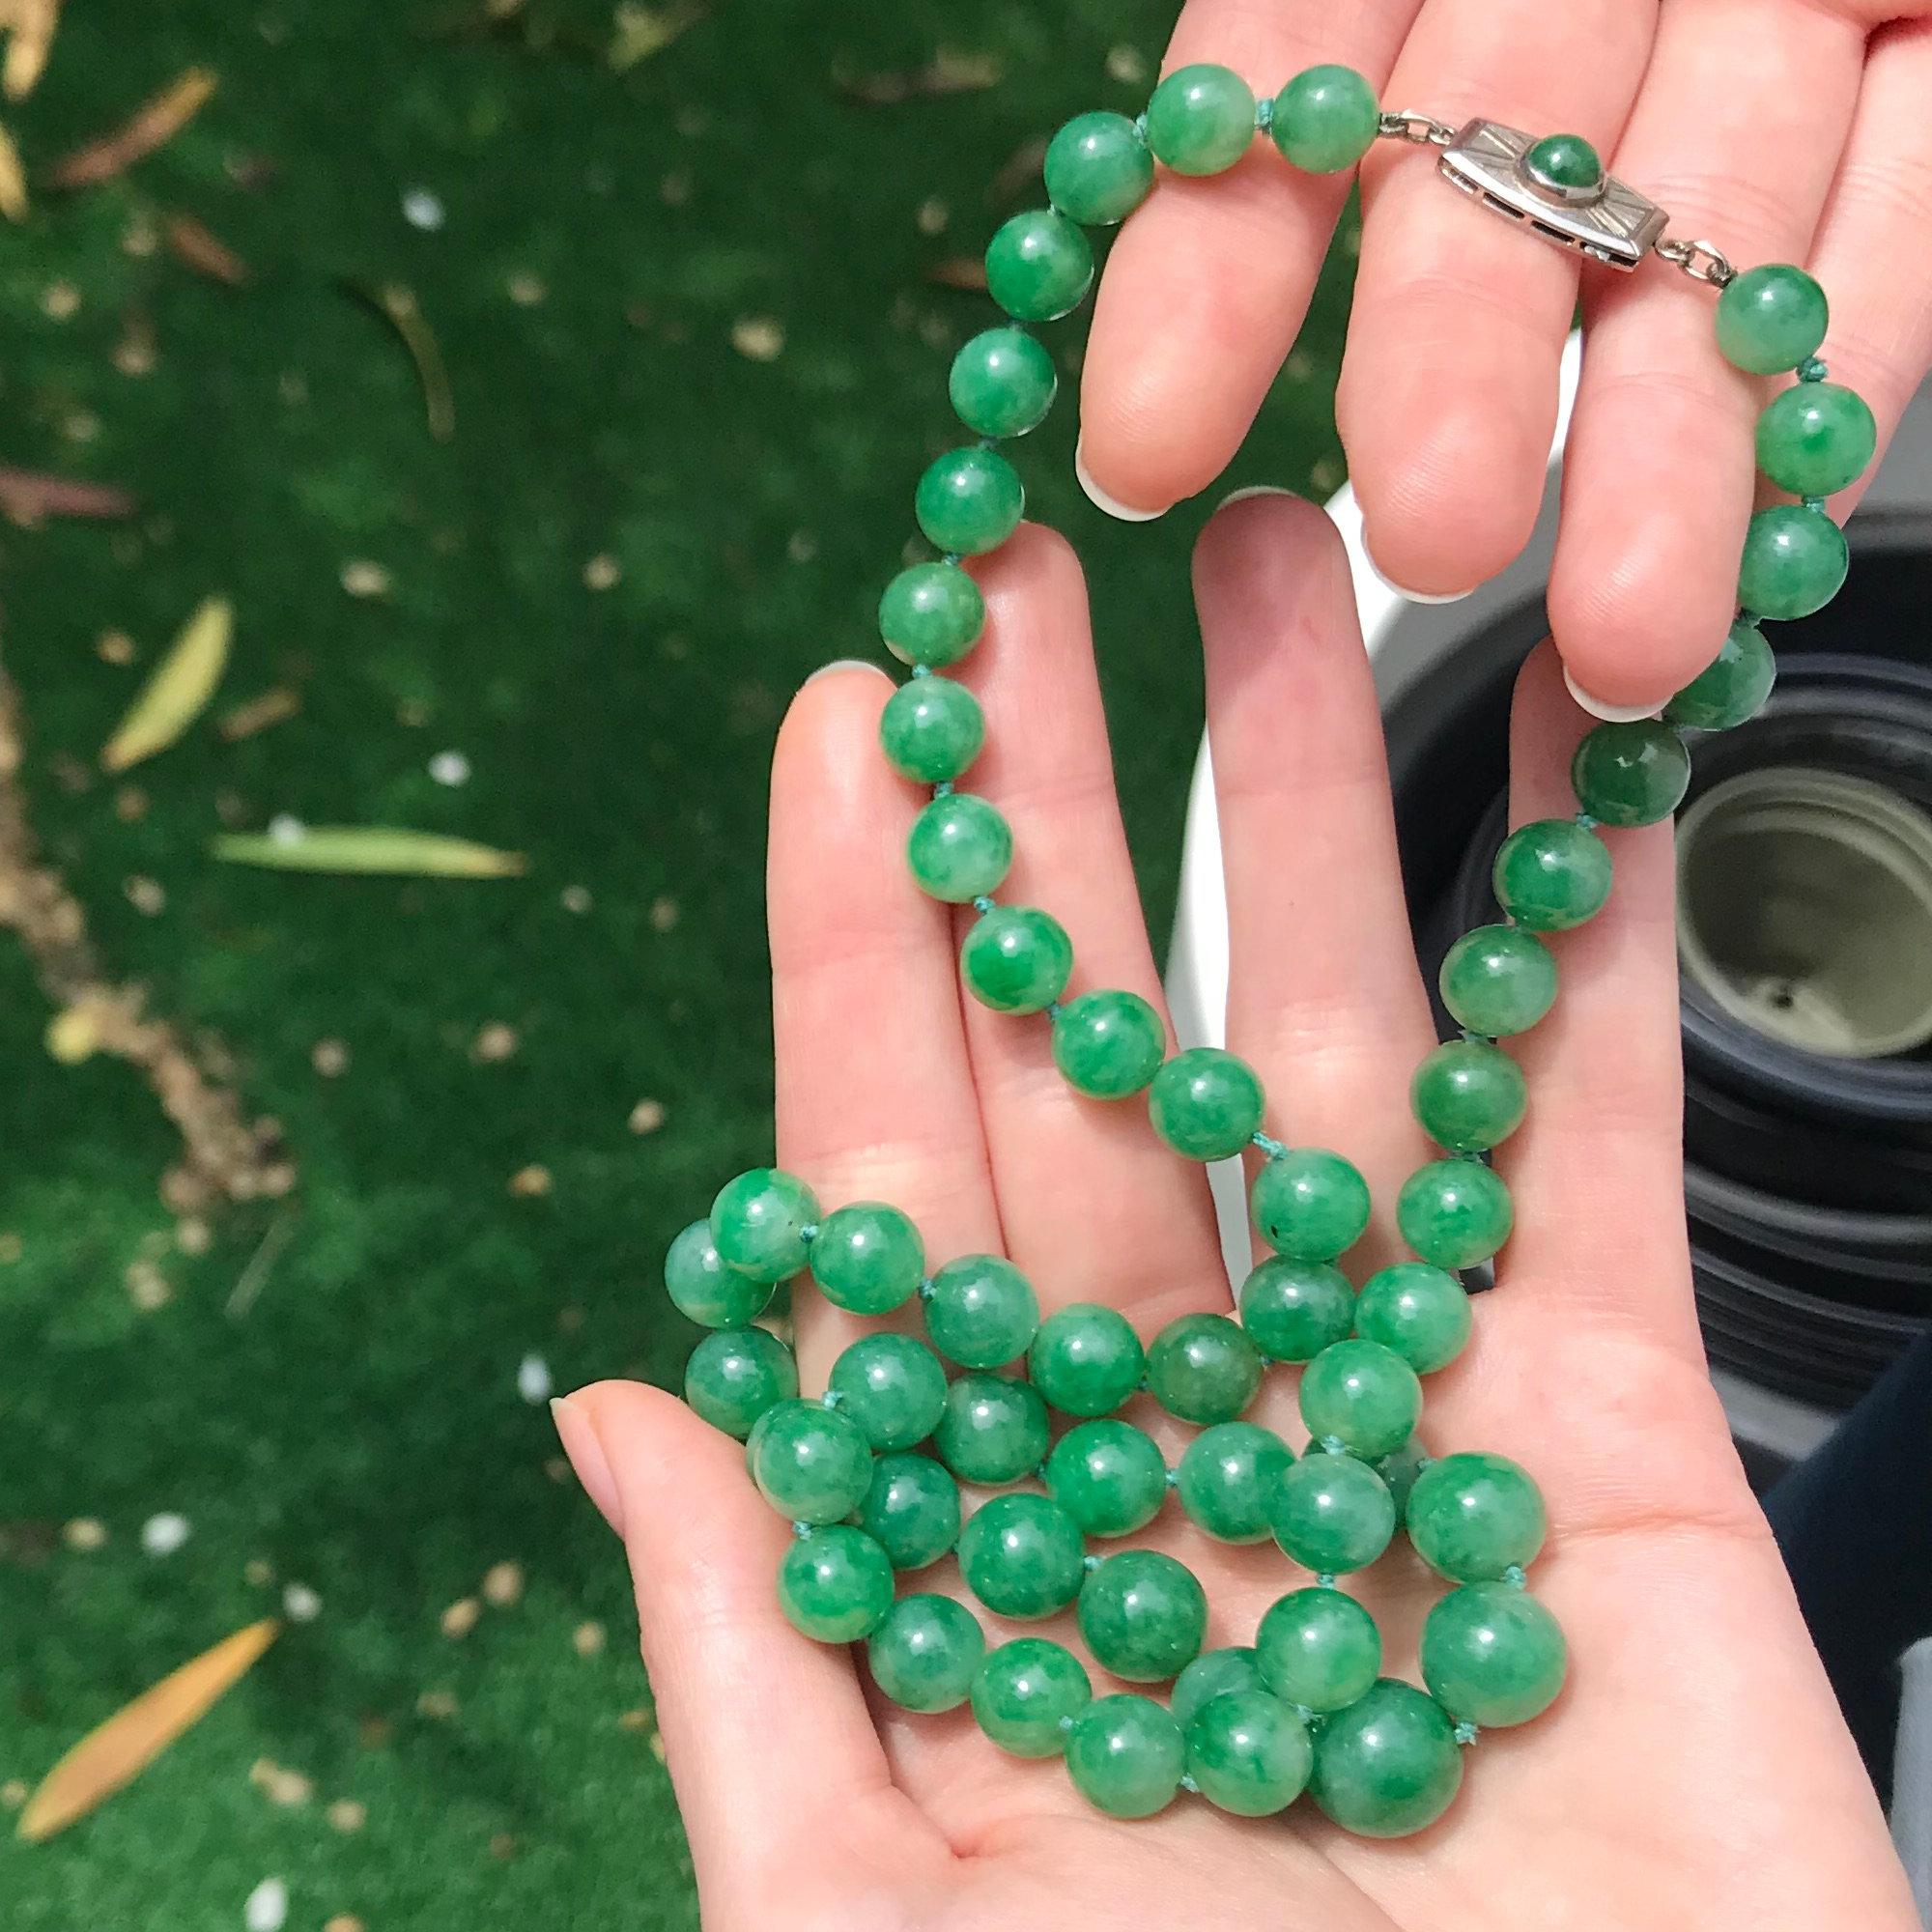 Certified Top Quality Natural A-Jadeite Necklace of 53 beads (67,51 grams) 
A-Jade, translucent, mottled light green and green

Do you wish for a 360° view of this unique jewel?
Just send us your request and we’ll give you the direct link to the